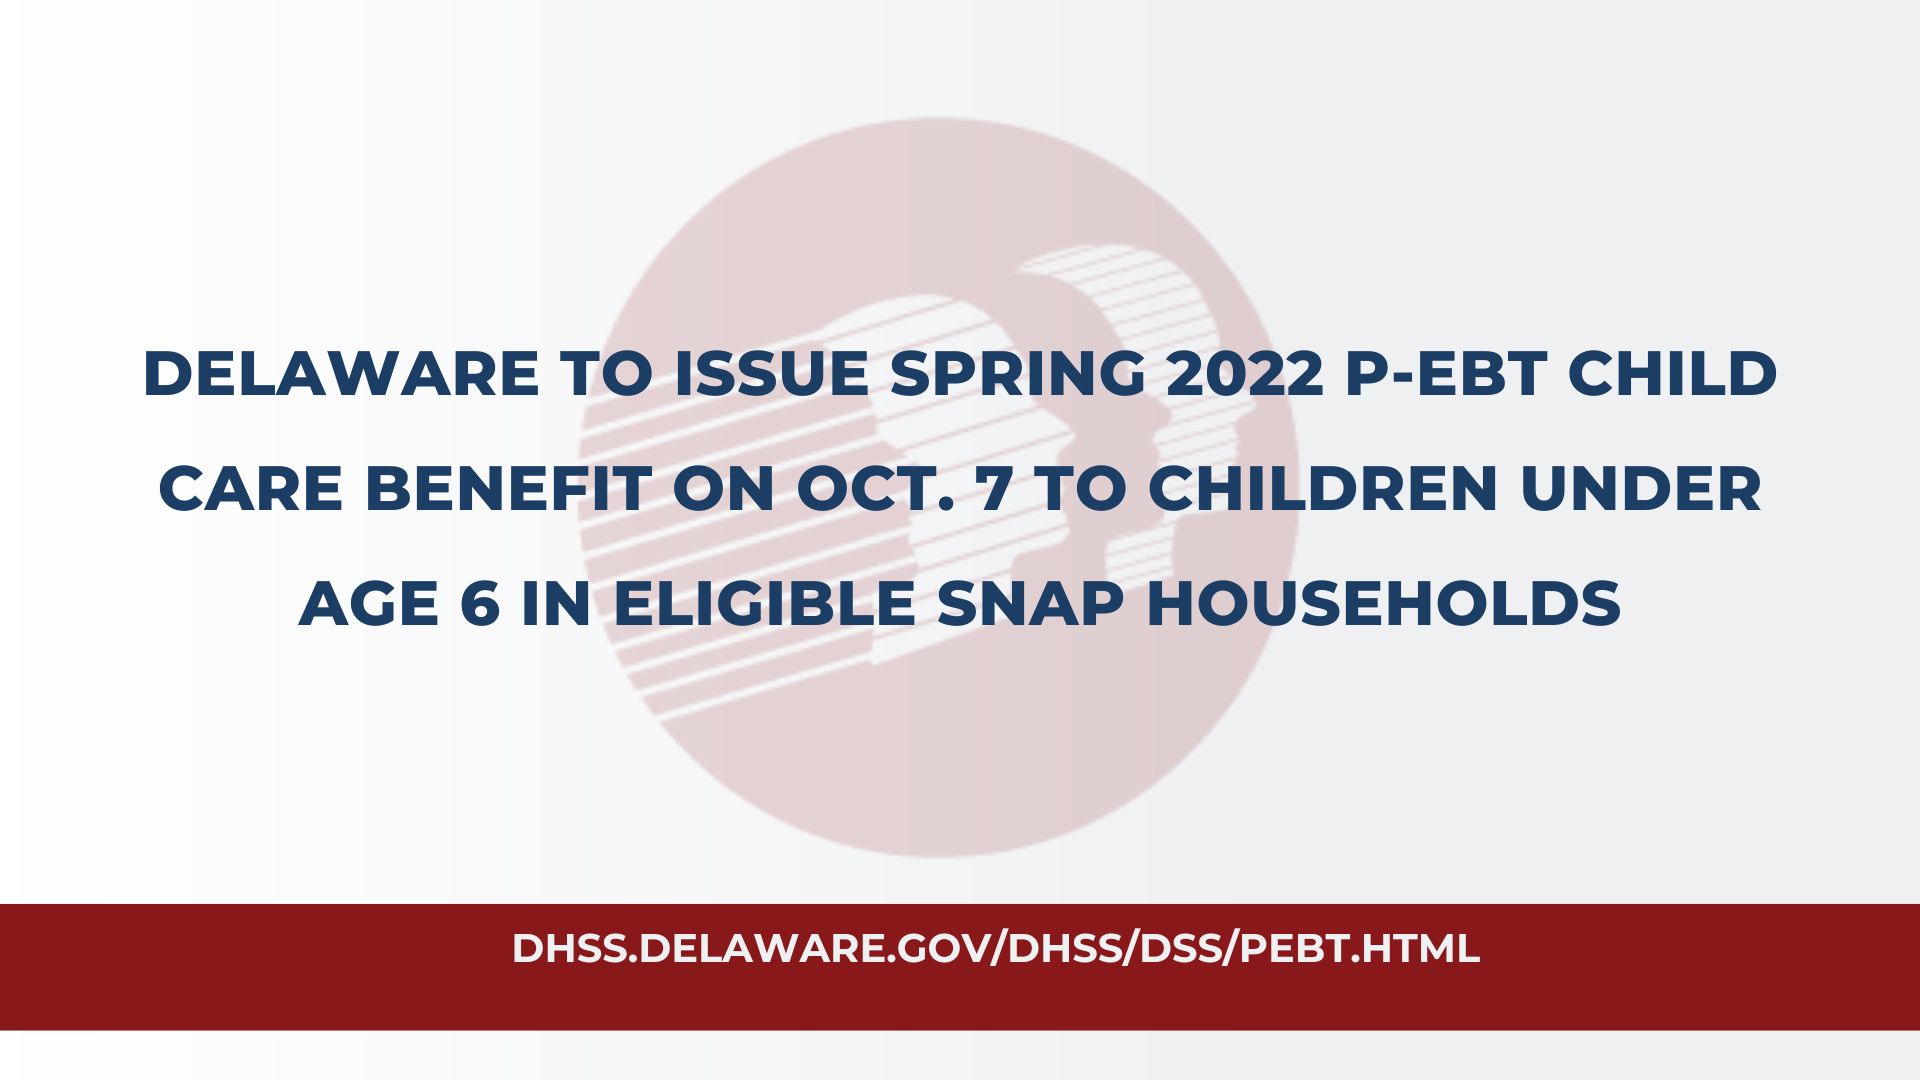 Delaware to Issue Spring 2022 P-EBT Child Care Benefit on Oct. 7 to Children under Age 6 in eligible snap households